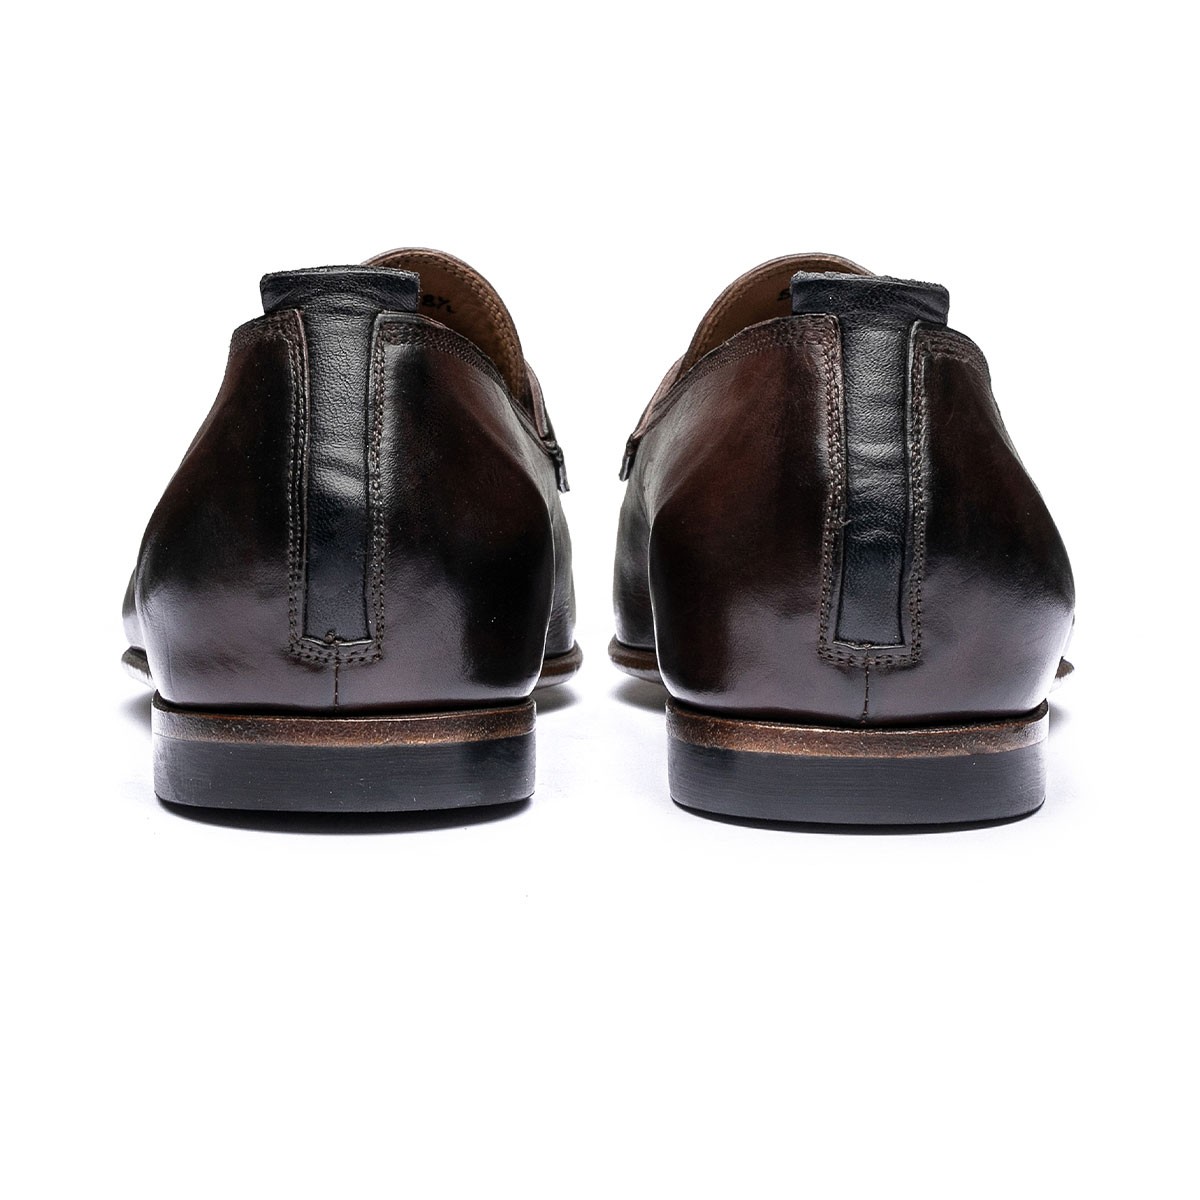 Brown leather loafers